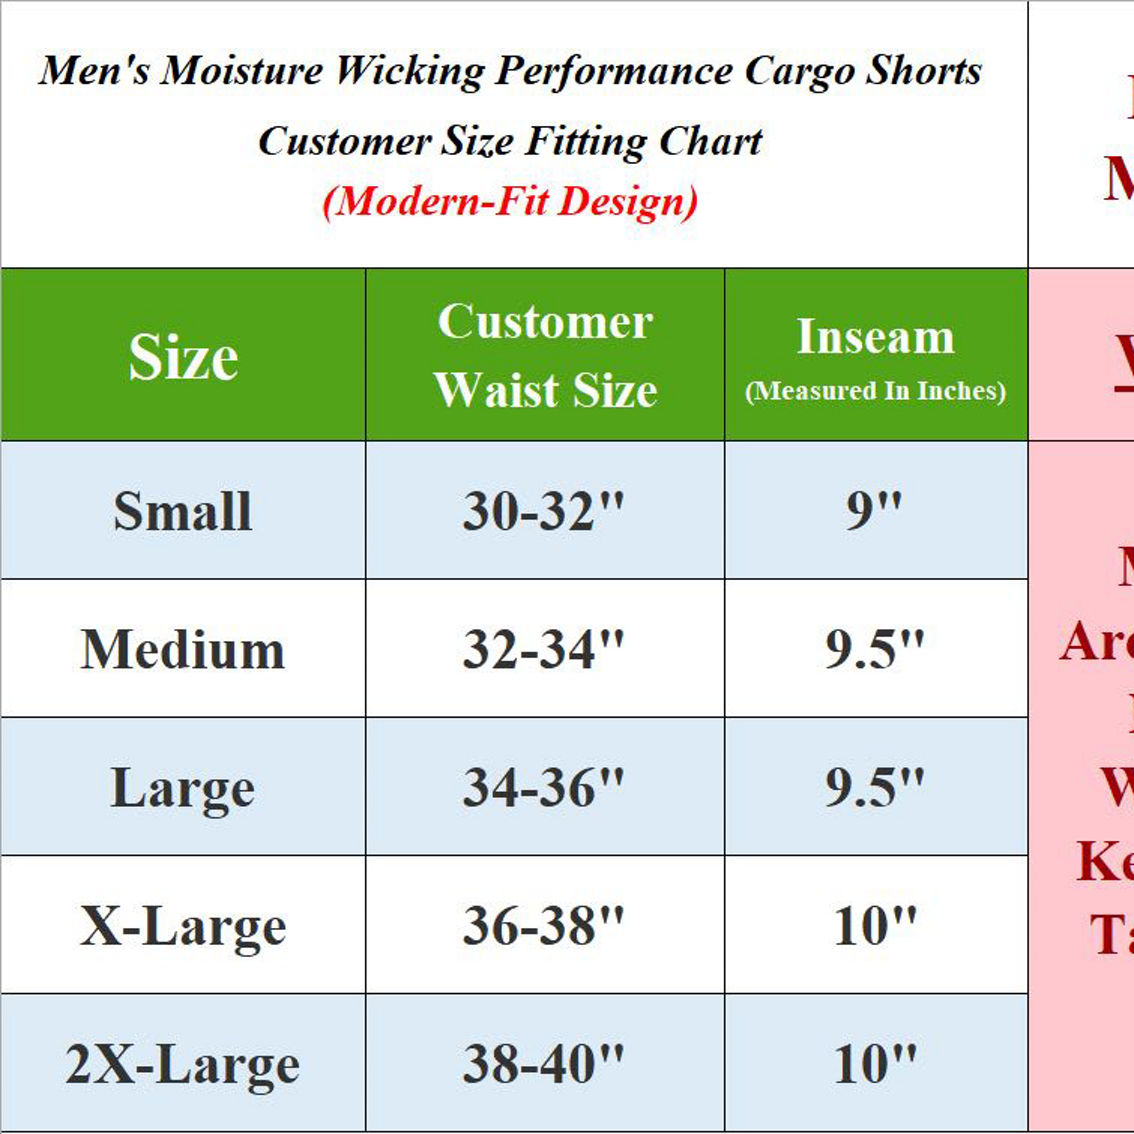 Men's Moisture Wicking Performance Quick Dry Cargo Shorts-2 Pack - Image 2 of 2